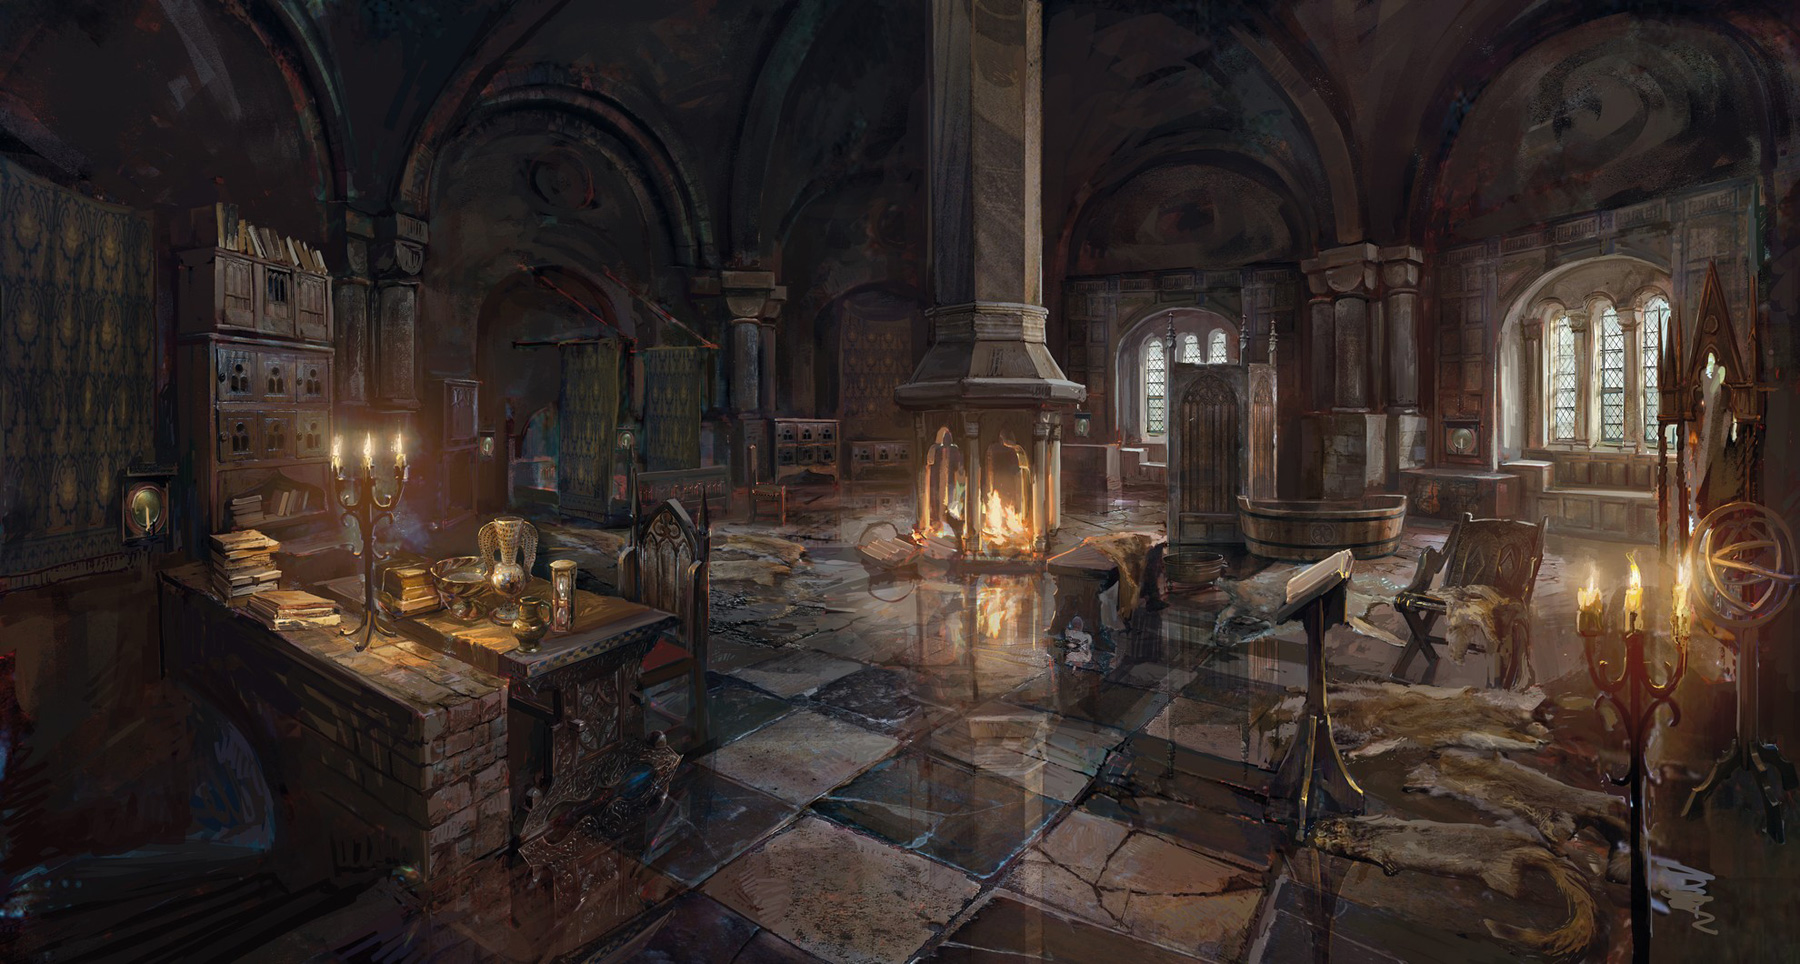 The Witcher 3: Wild Hunt Concept and Promo Art | Concept Art World